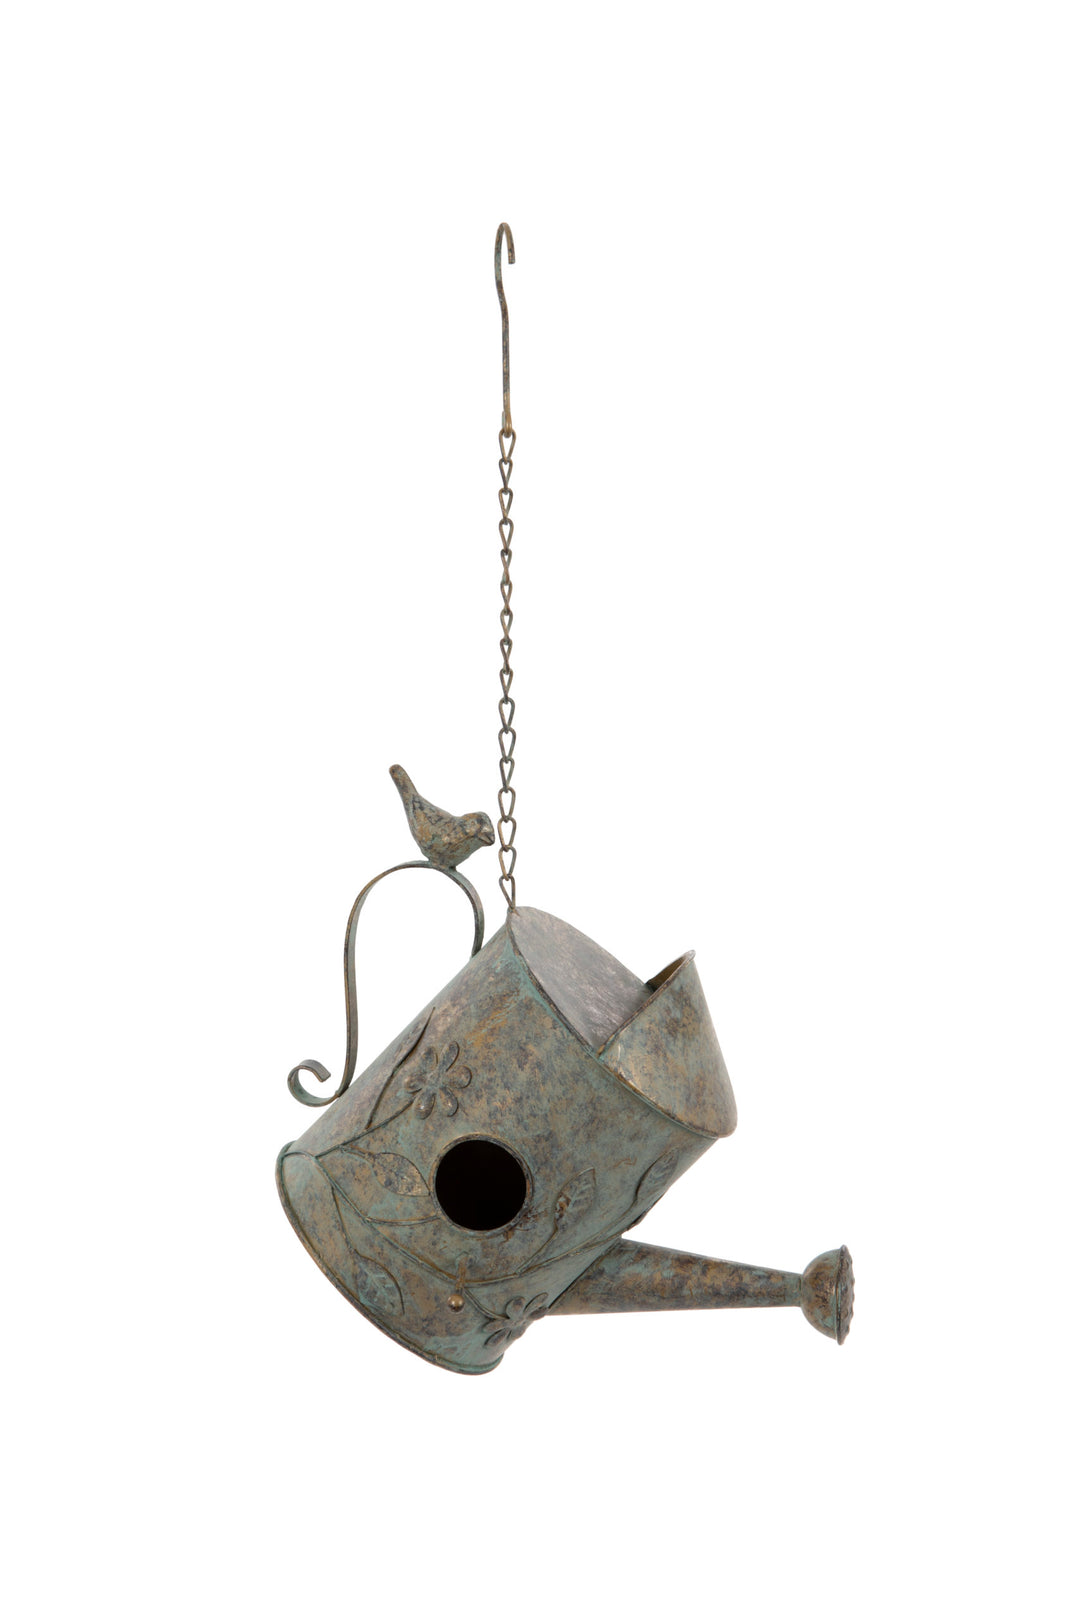 Watering Can Birdhouse